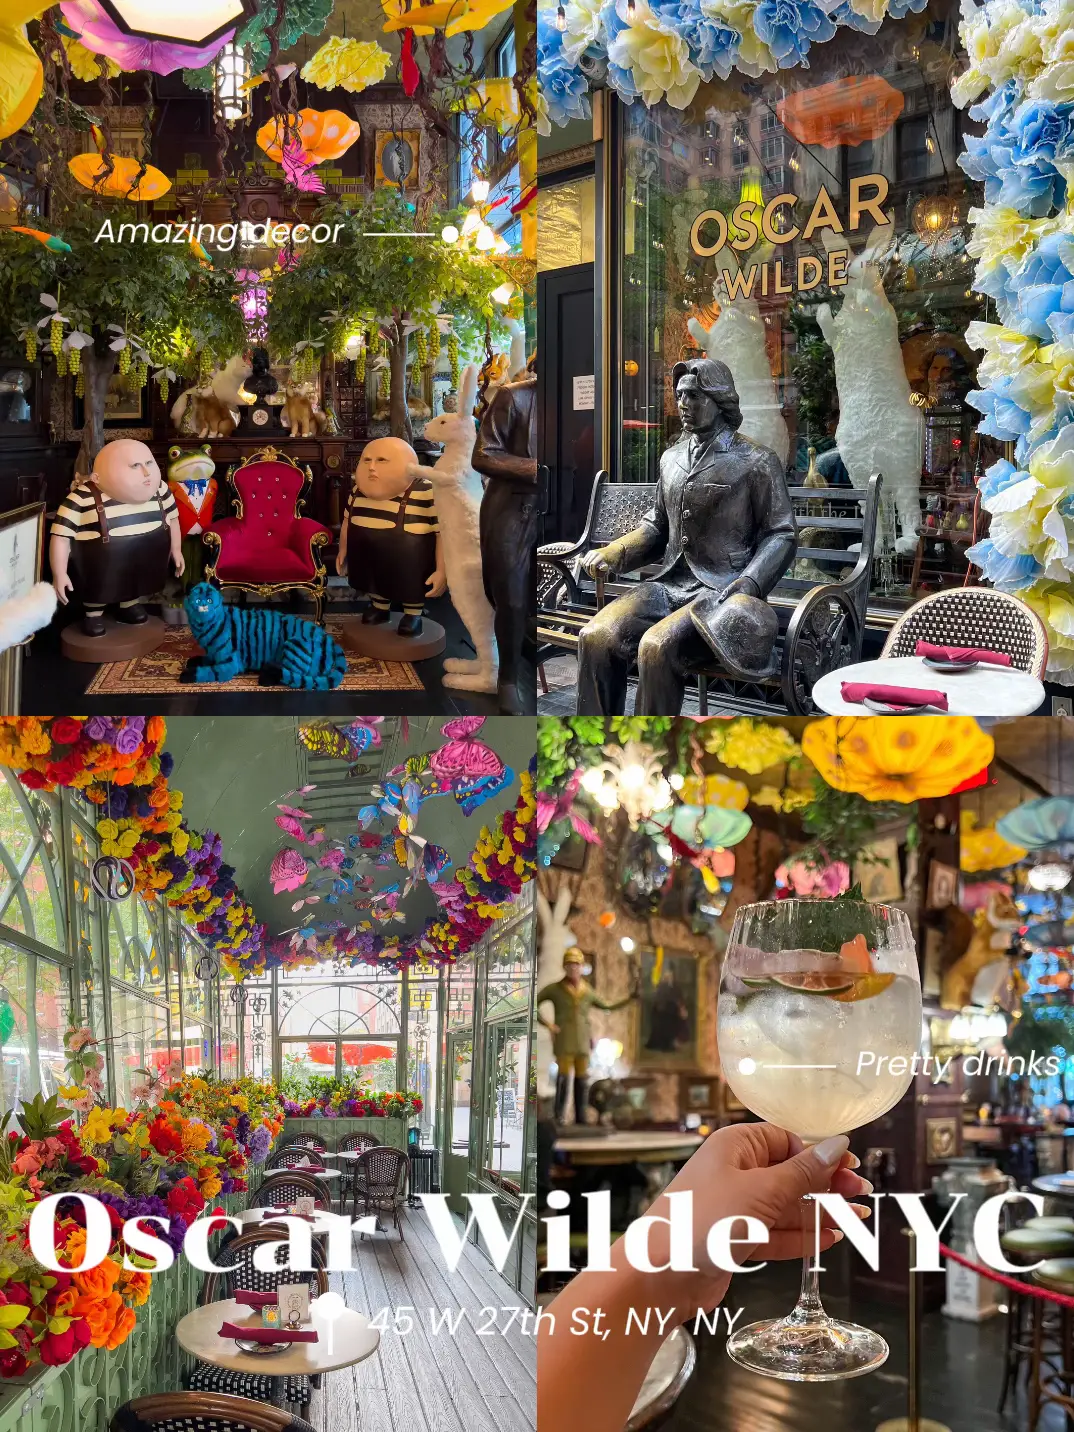  A collage of photos of people in a bar with a sign that says Oscar Wilde New York.